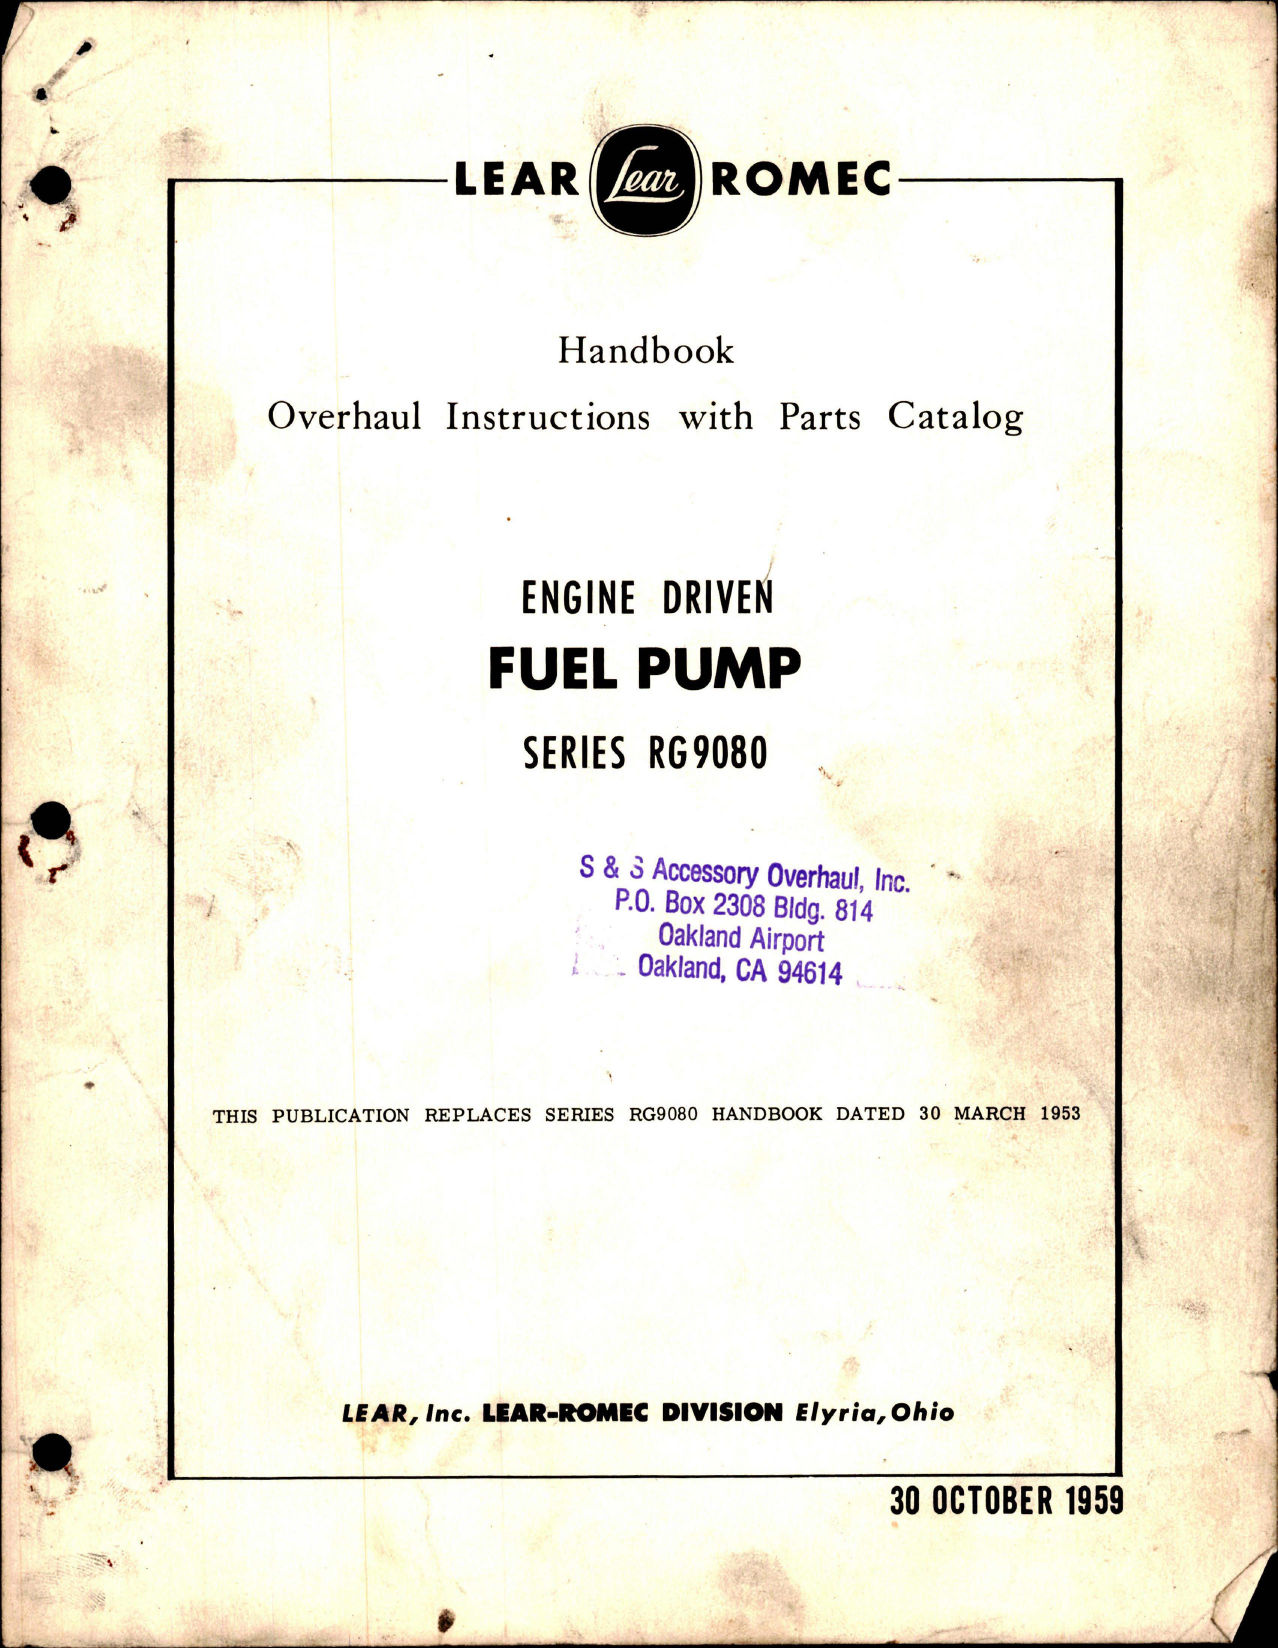 Sample page 1 from AirCorps Library document: Overhaul Instructions with Parts Catalog for Engine Driven Fuel Pump - Series RG9080 